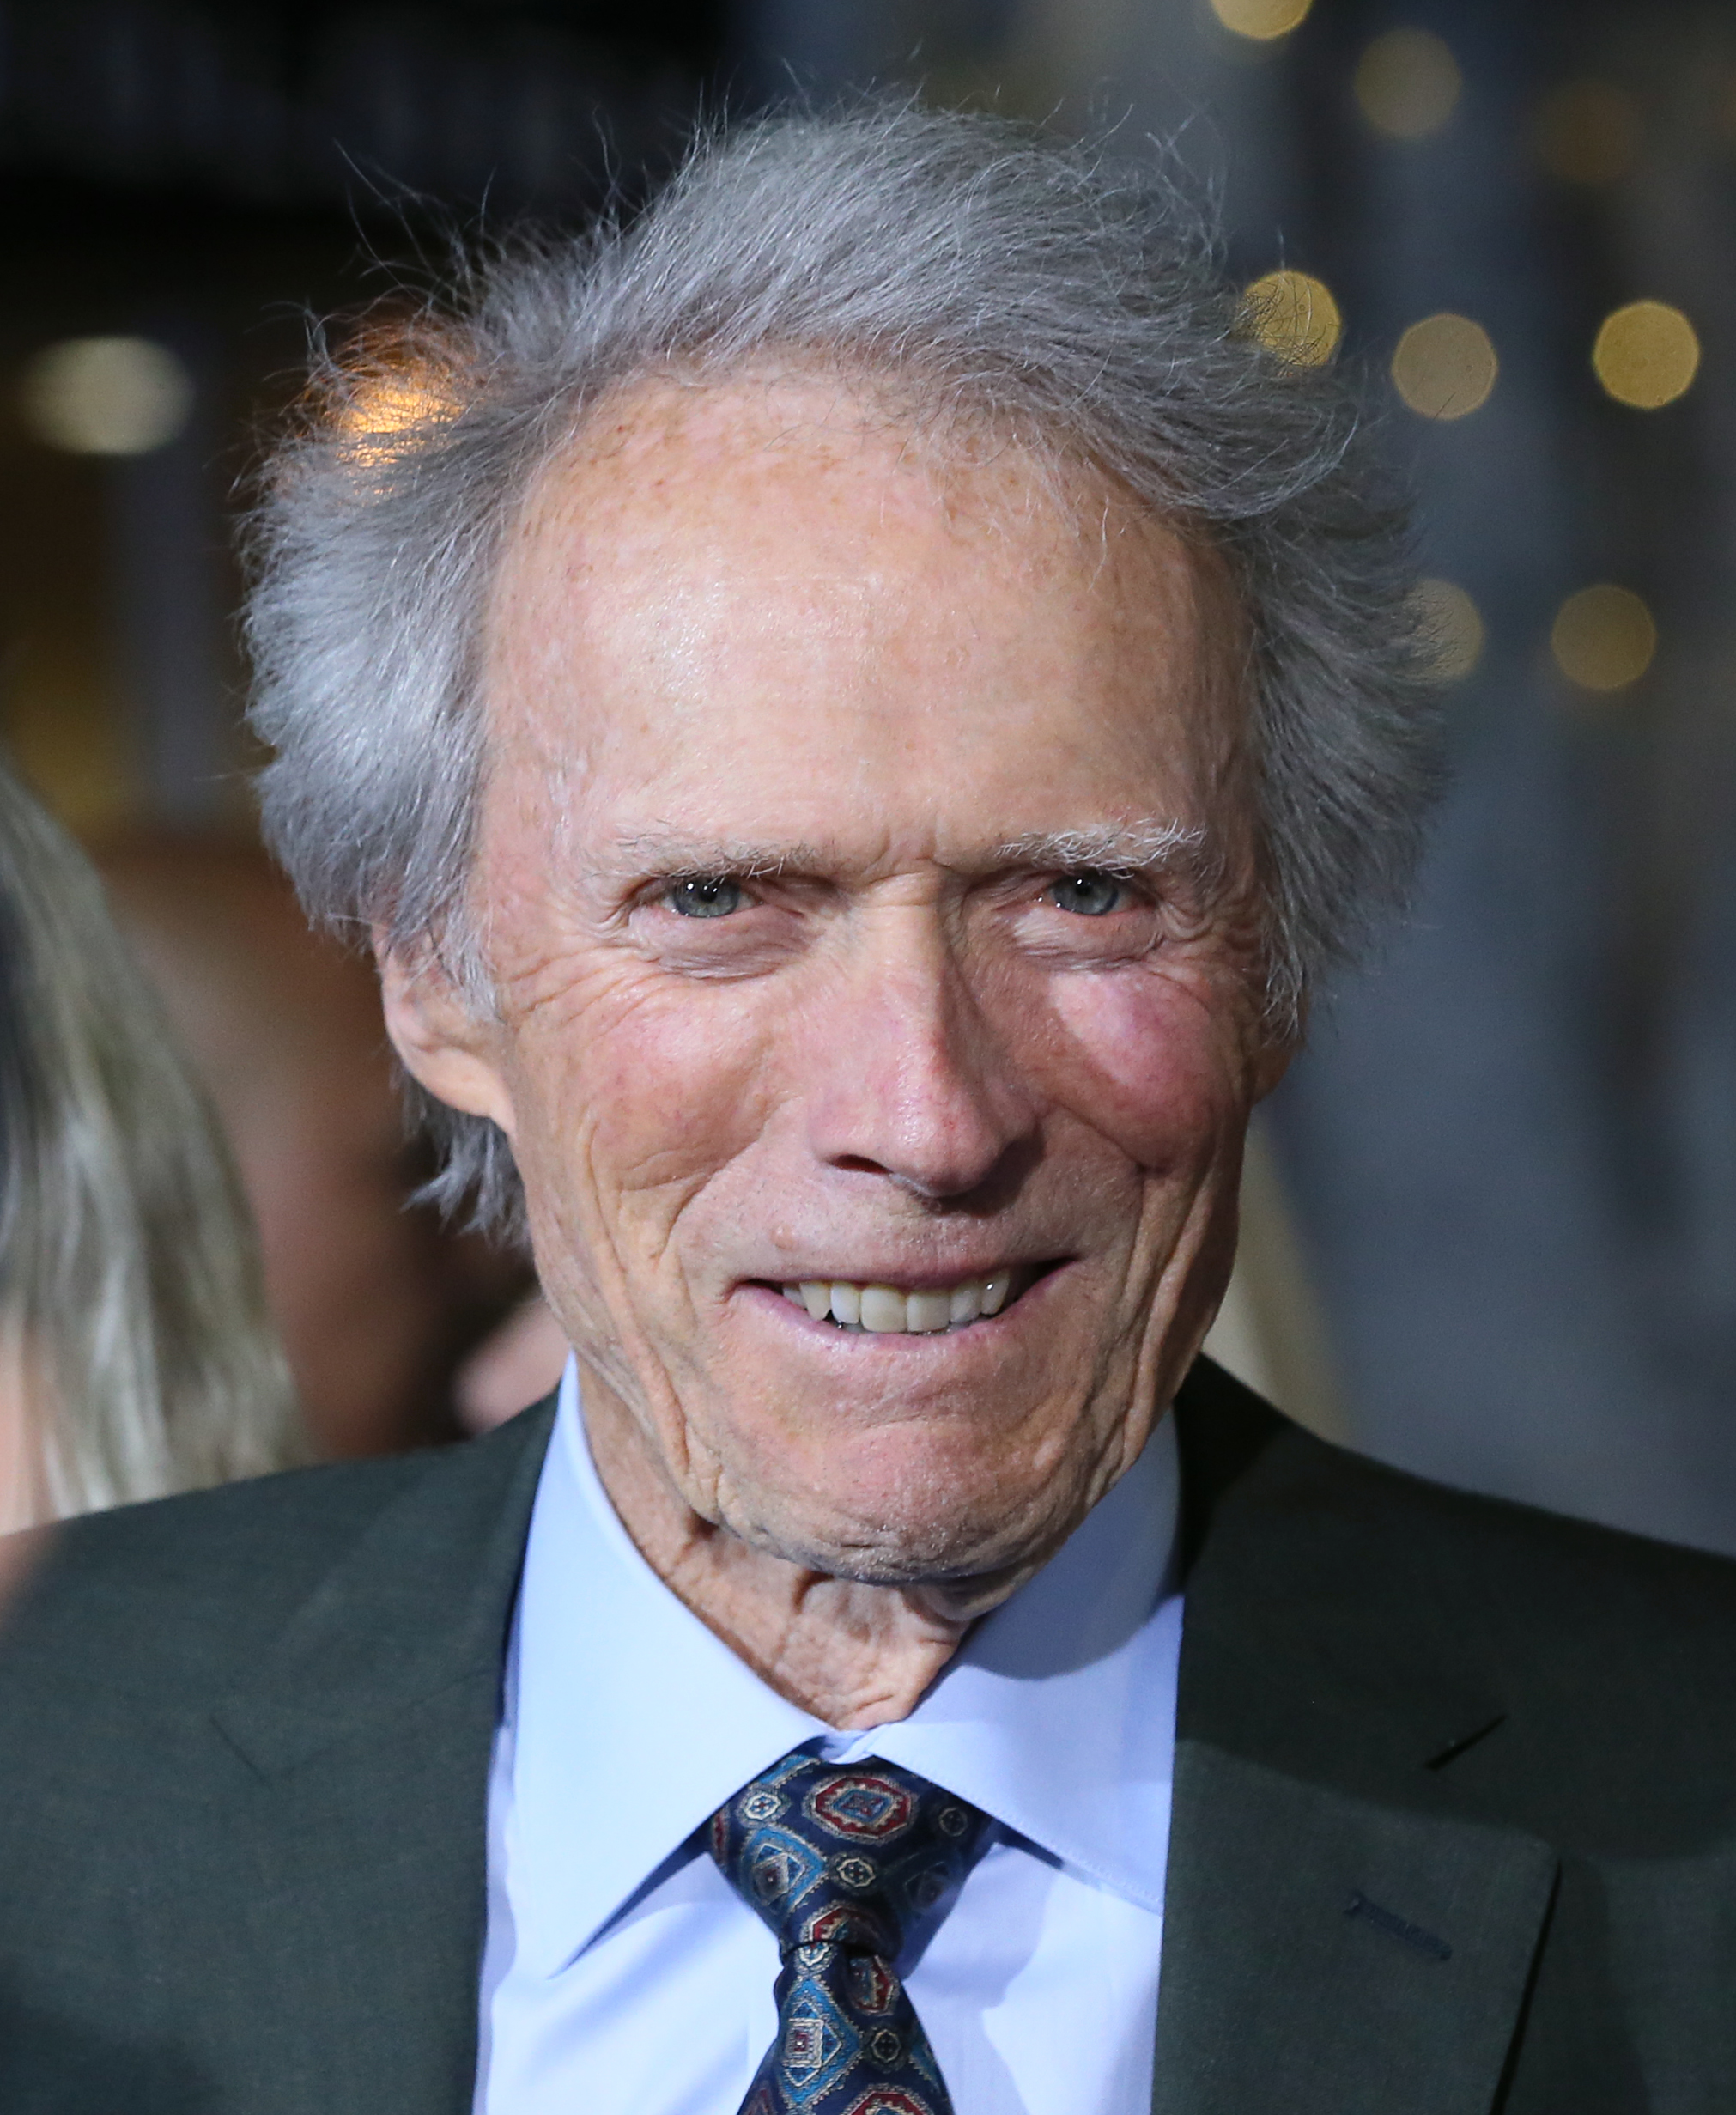 Clint Eastwood in Los Angeles, California on December 10, 2018 | Source: Getty Images